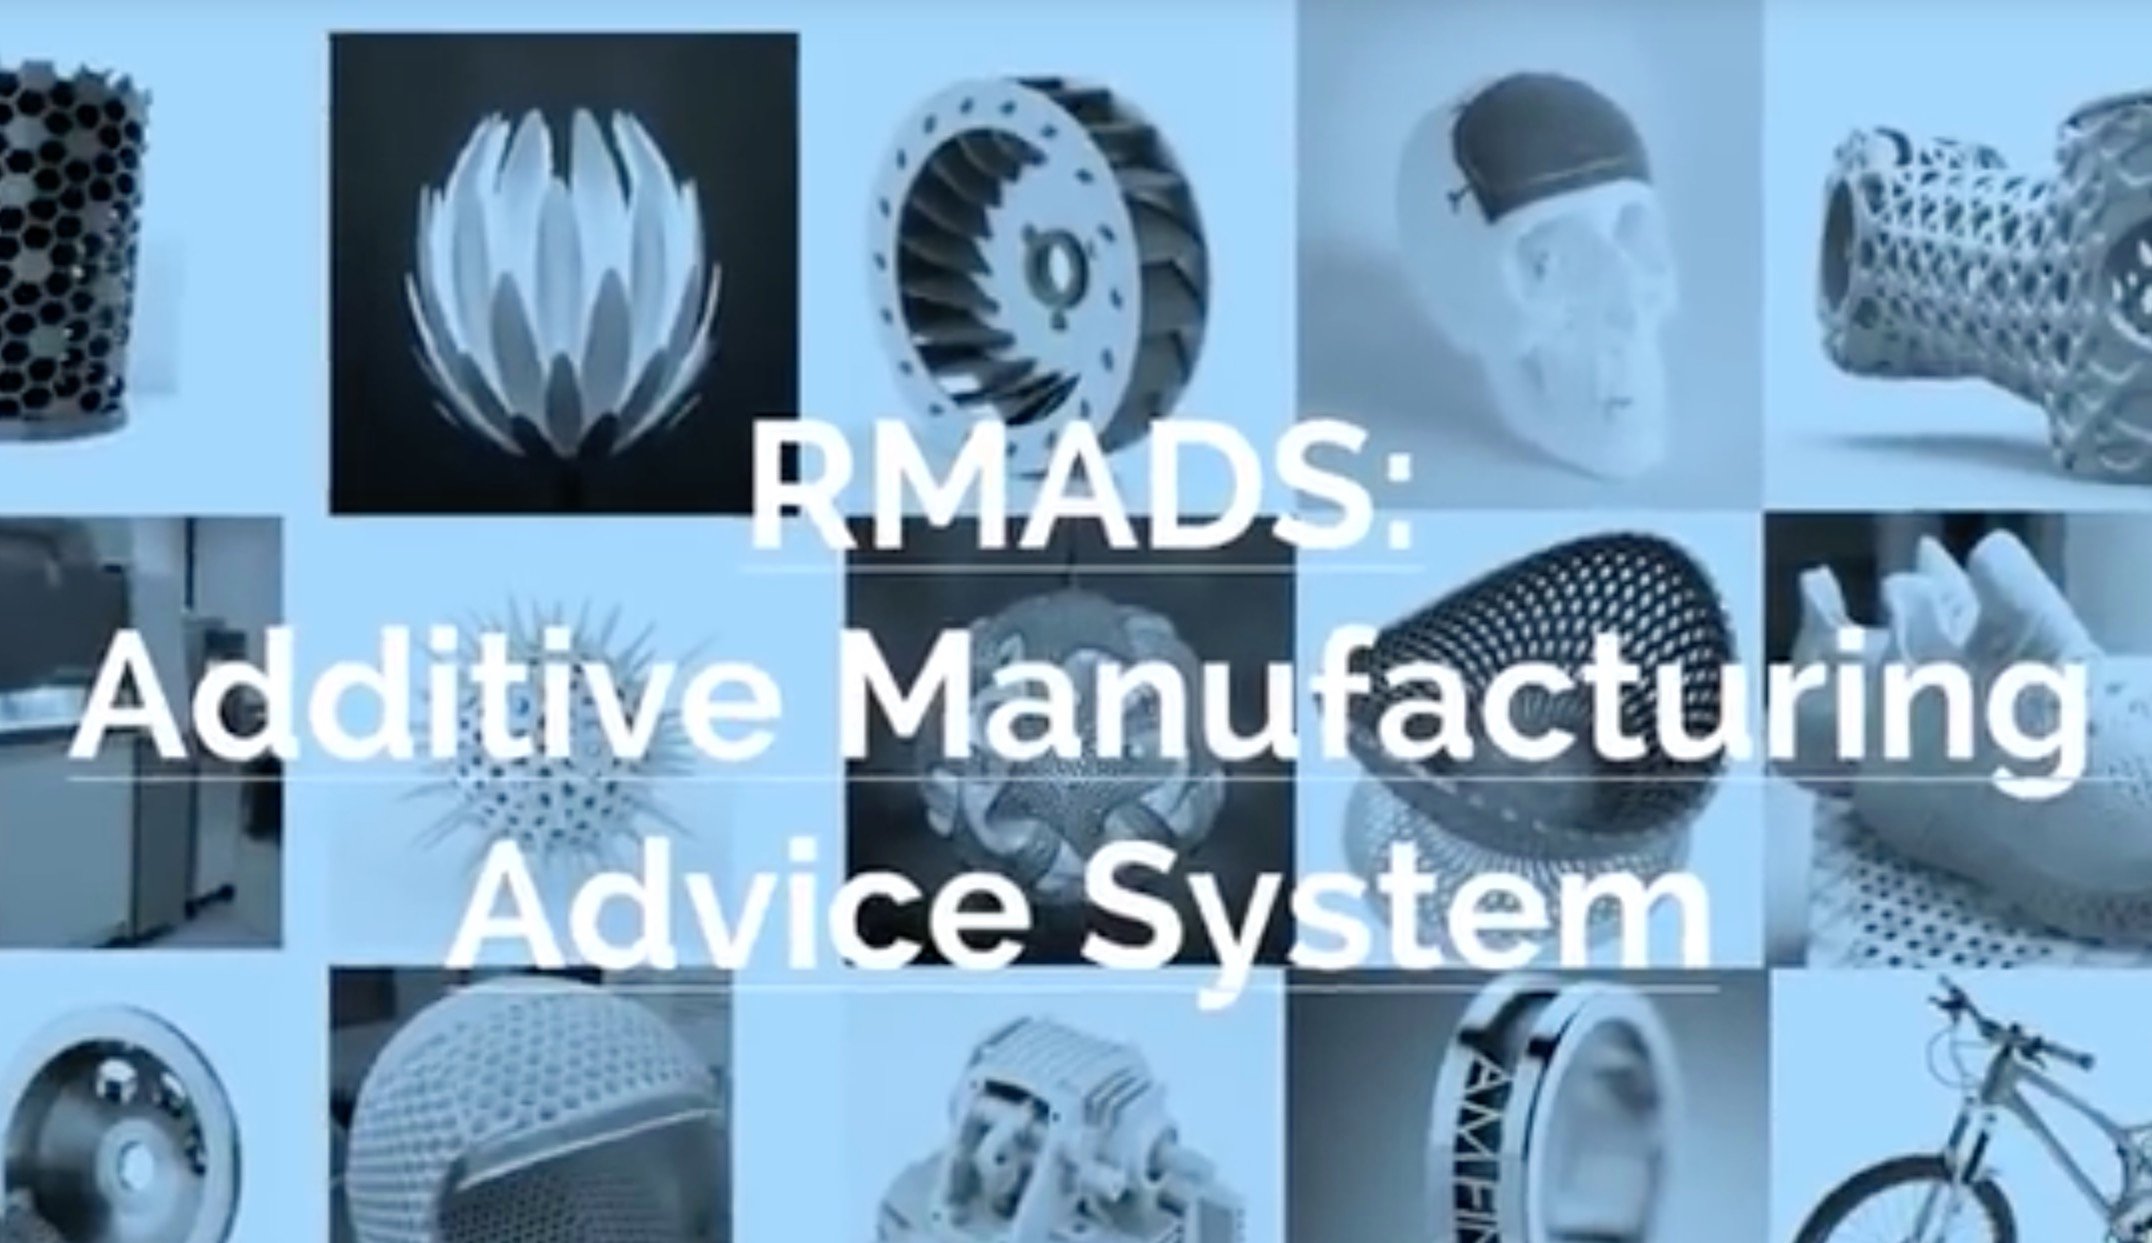  RMADS: Rapid Manufacturing Advice System 